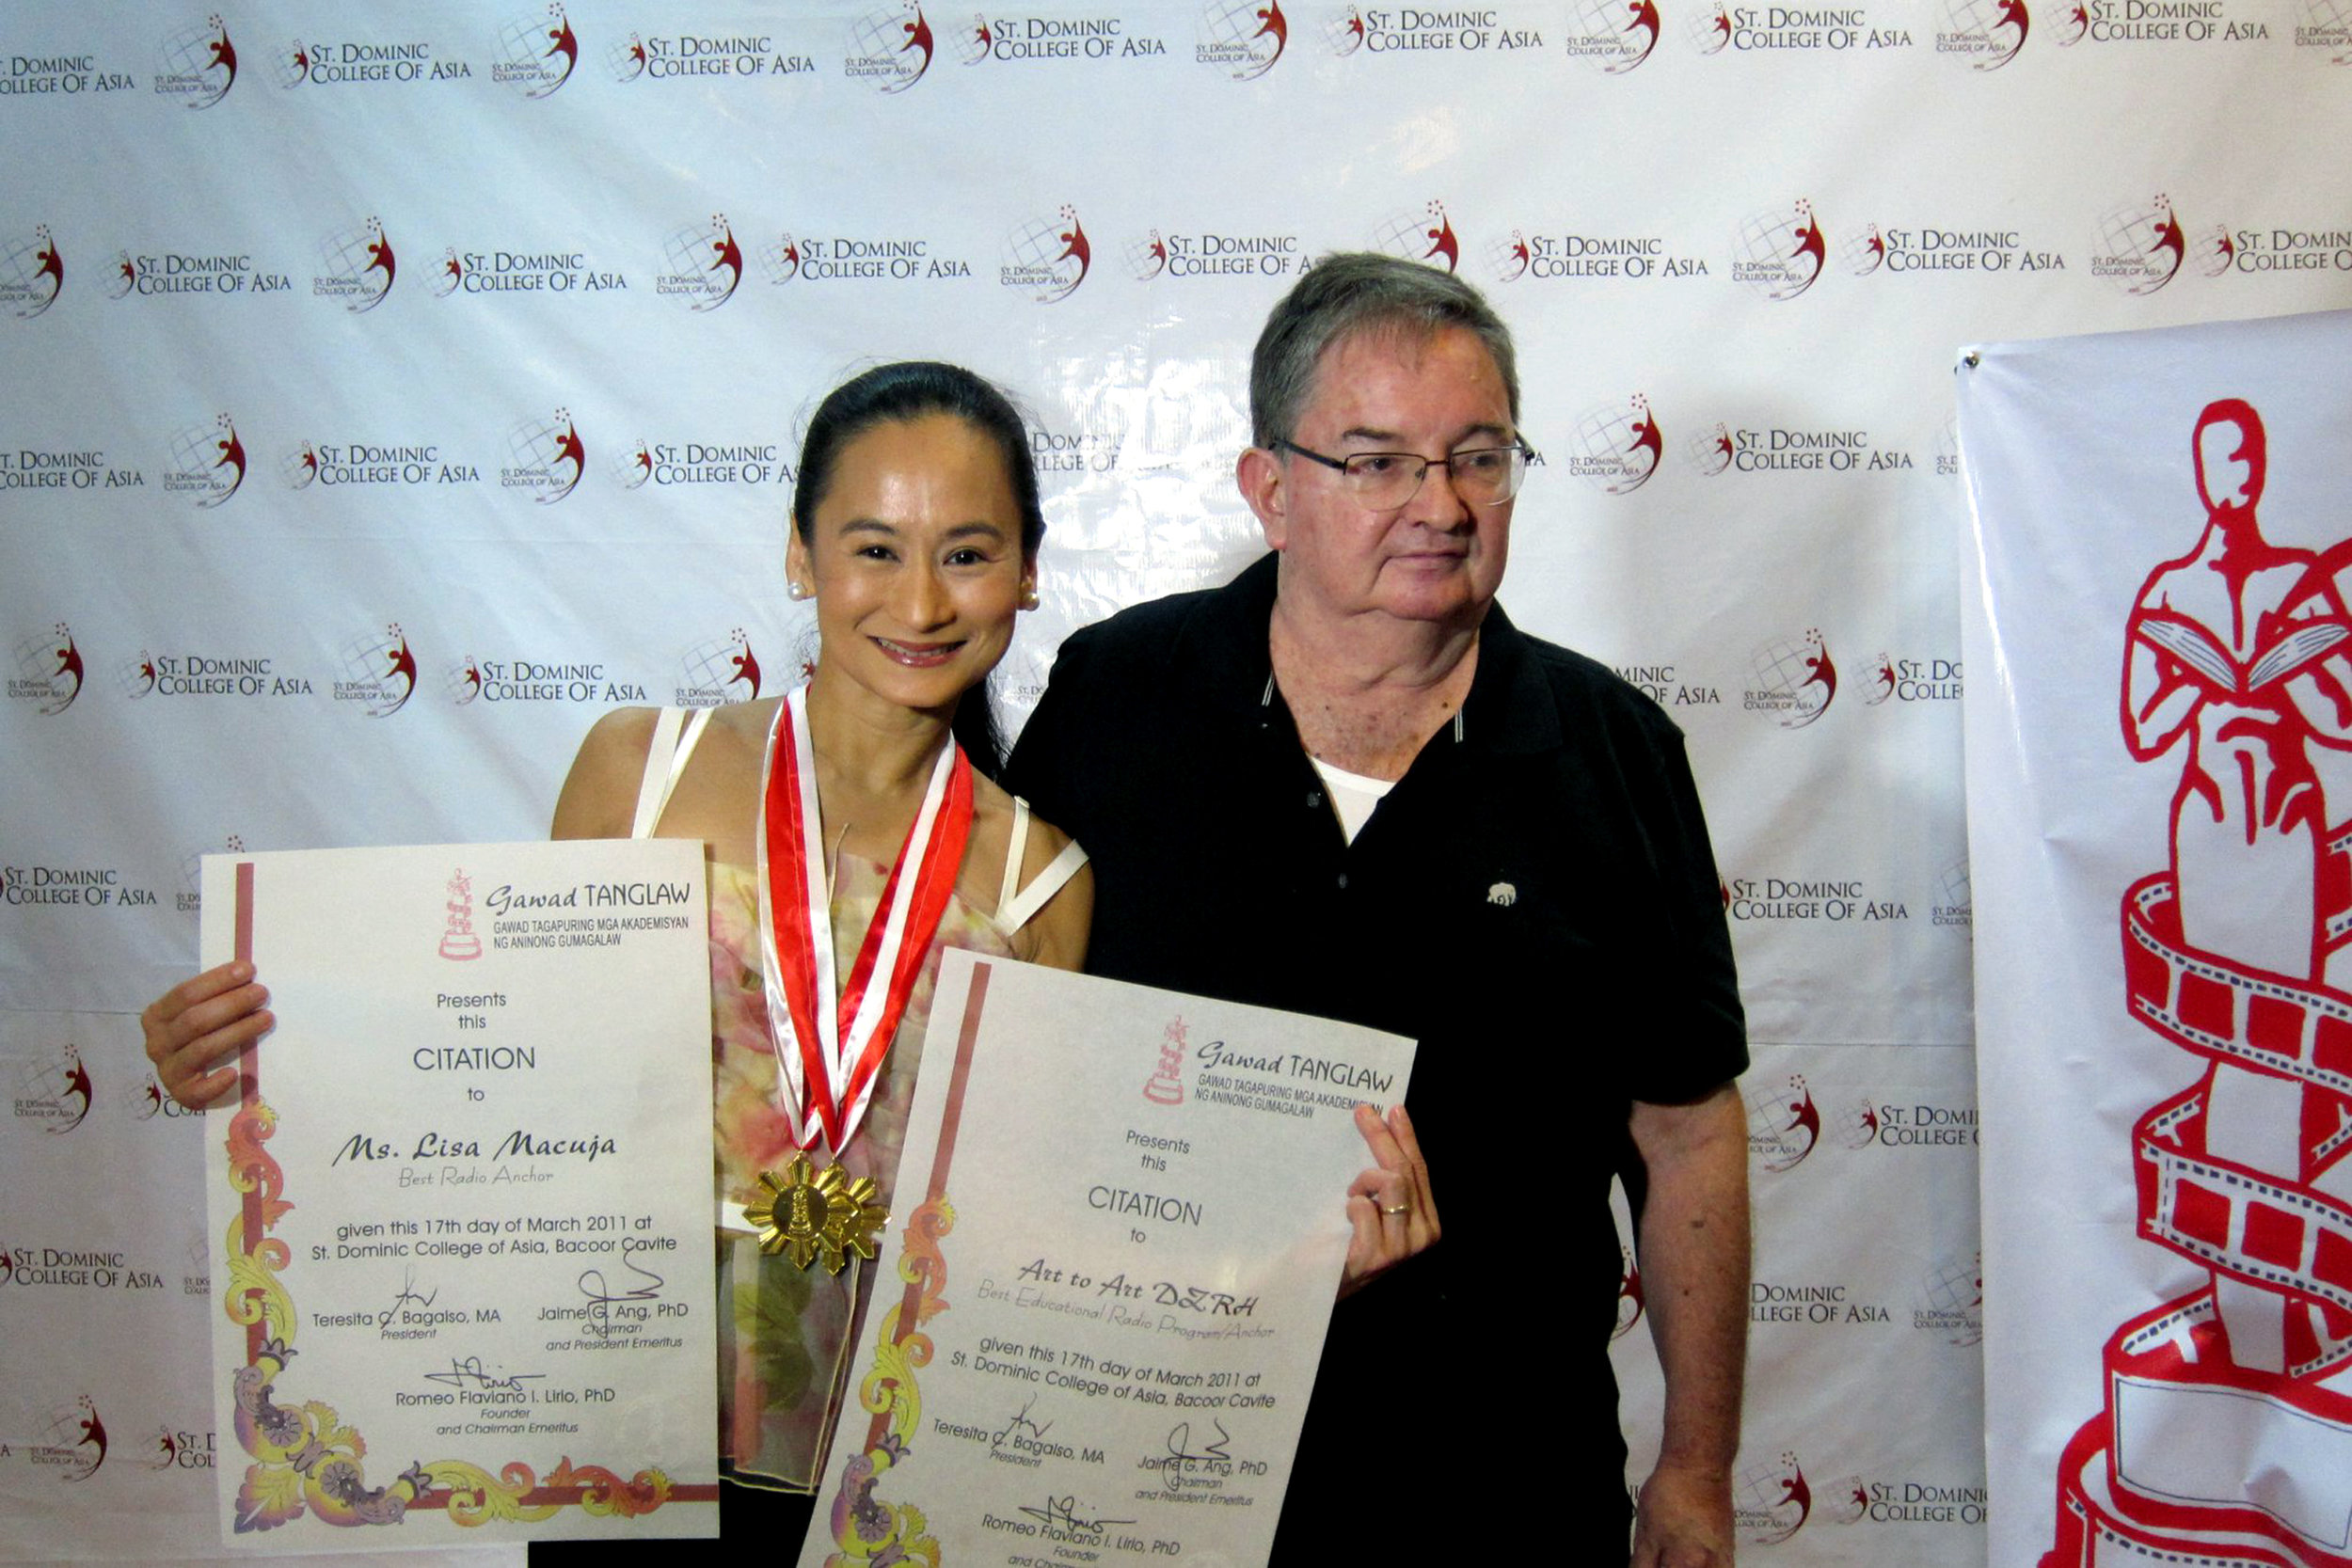  Lisa and Fred receive the Gawad Tanglaw citations in 2011, for Lisa as Best Radio Anchor and for  Art 2 Art  as Best Educational Program on Radio. 